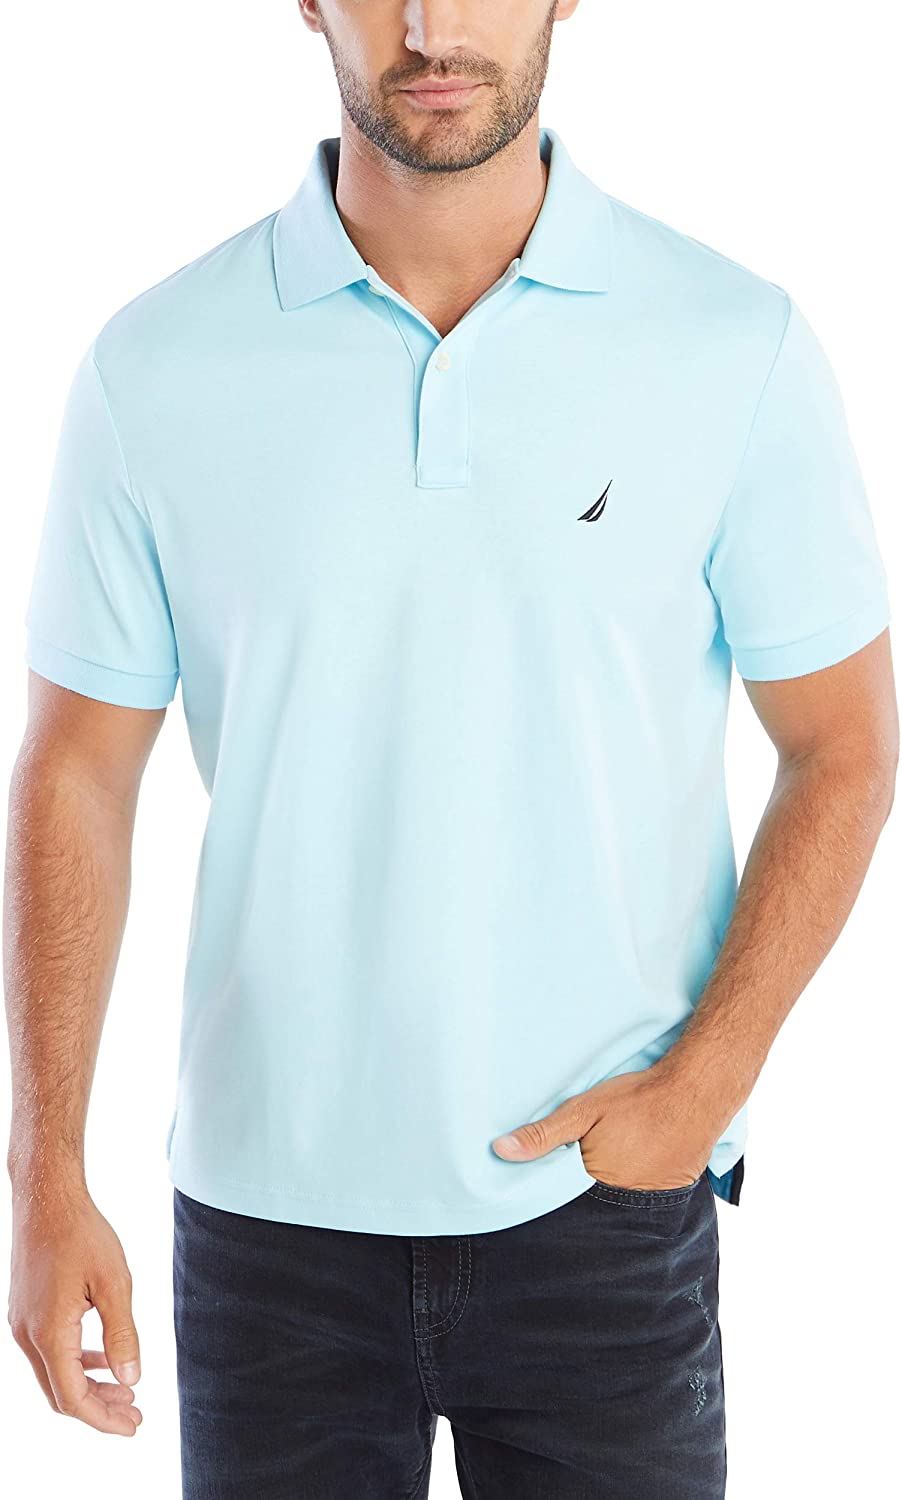 Coral Sands Nautica Mens Classic Fit Short Sleeve Solid Soft Cotton Polo Shirt 4X